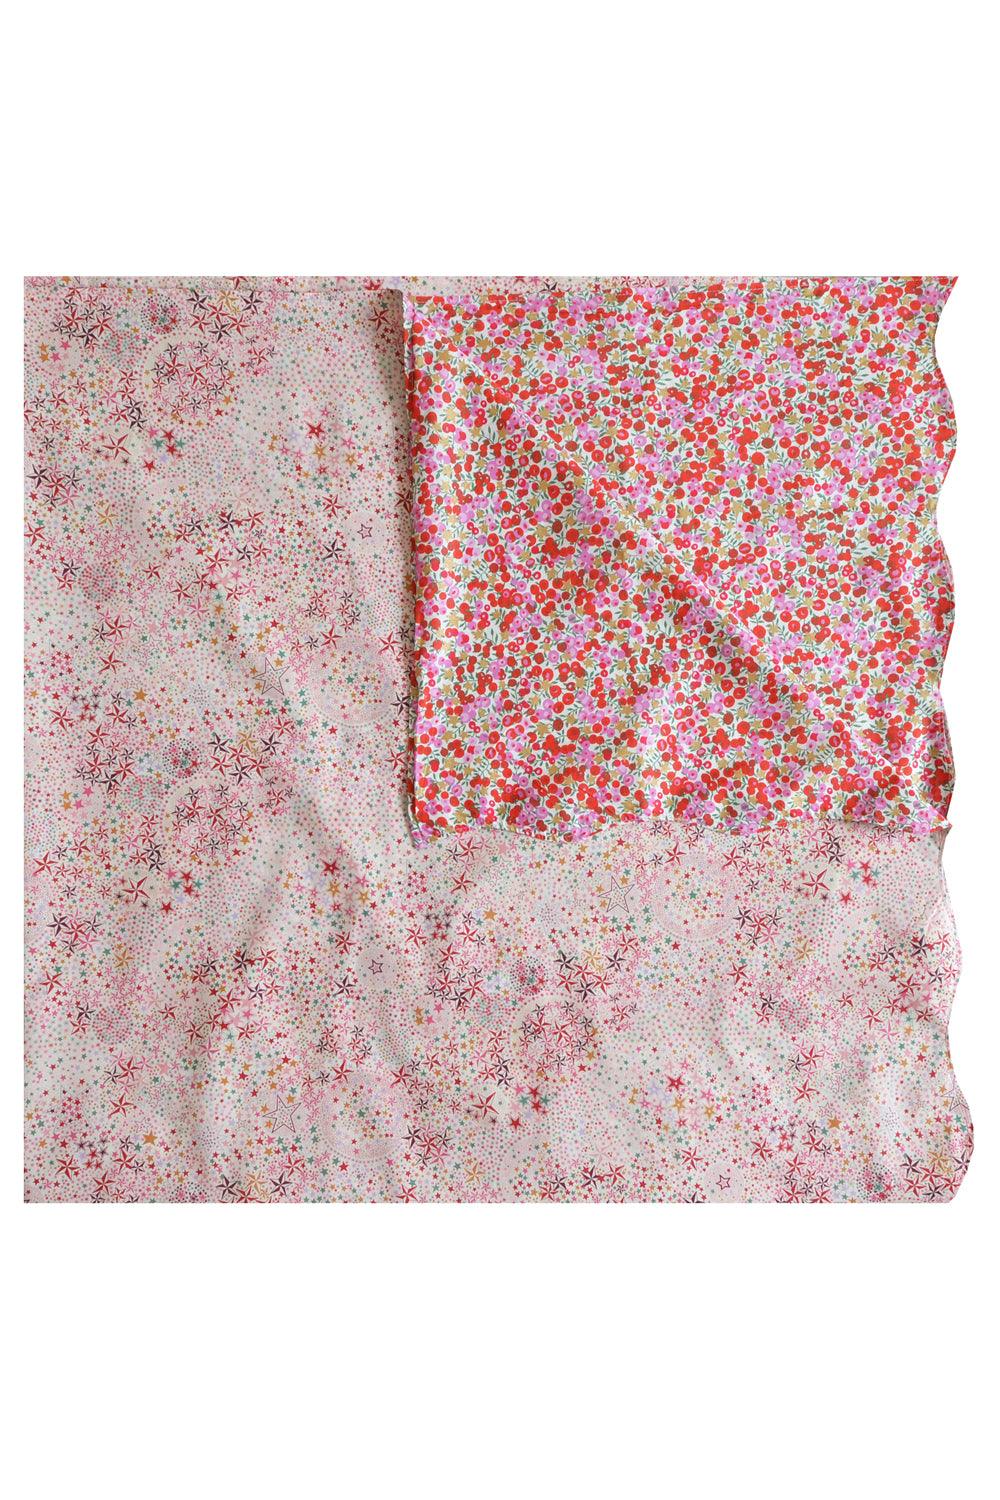 Reversible Tablecloth made with Liberty Fabric ADELAJDA'S WISH & WILTSHIRE STAR - Coco & Wolf